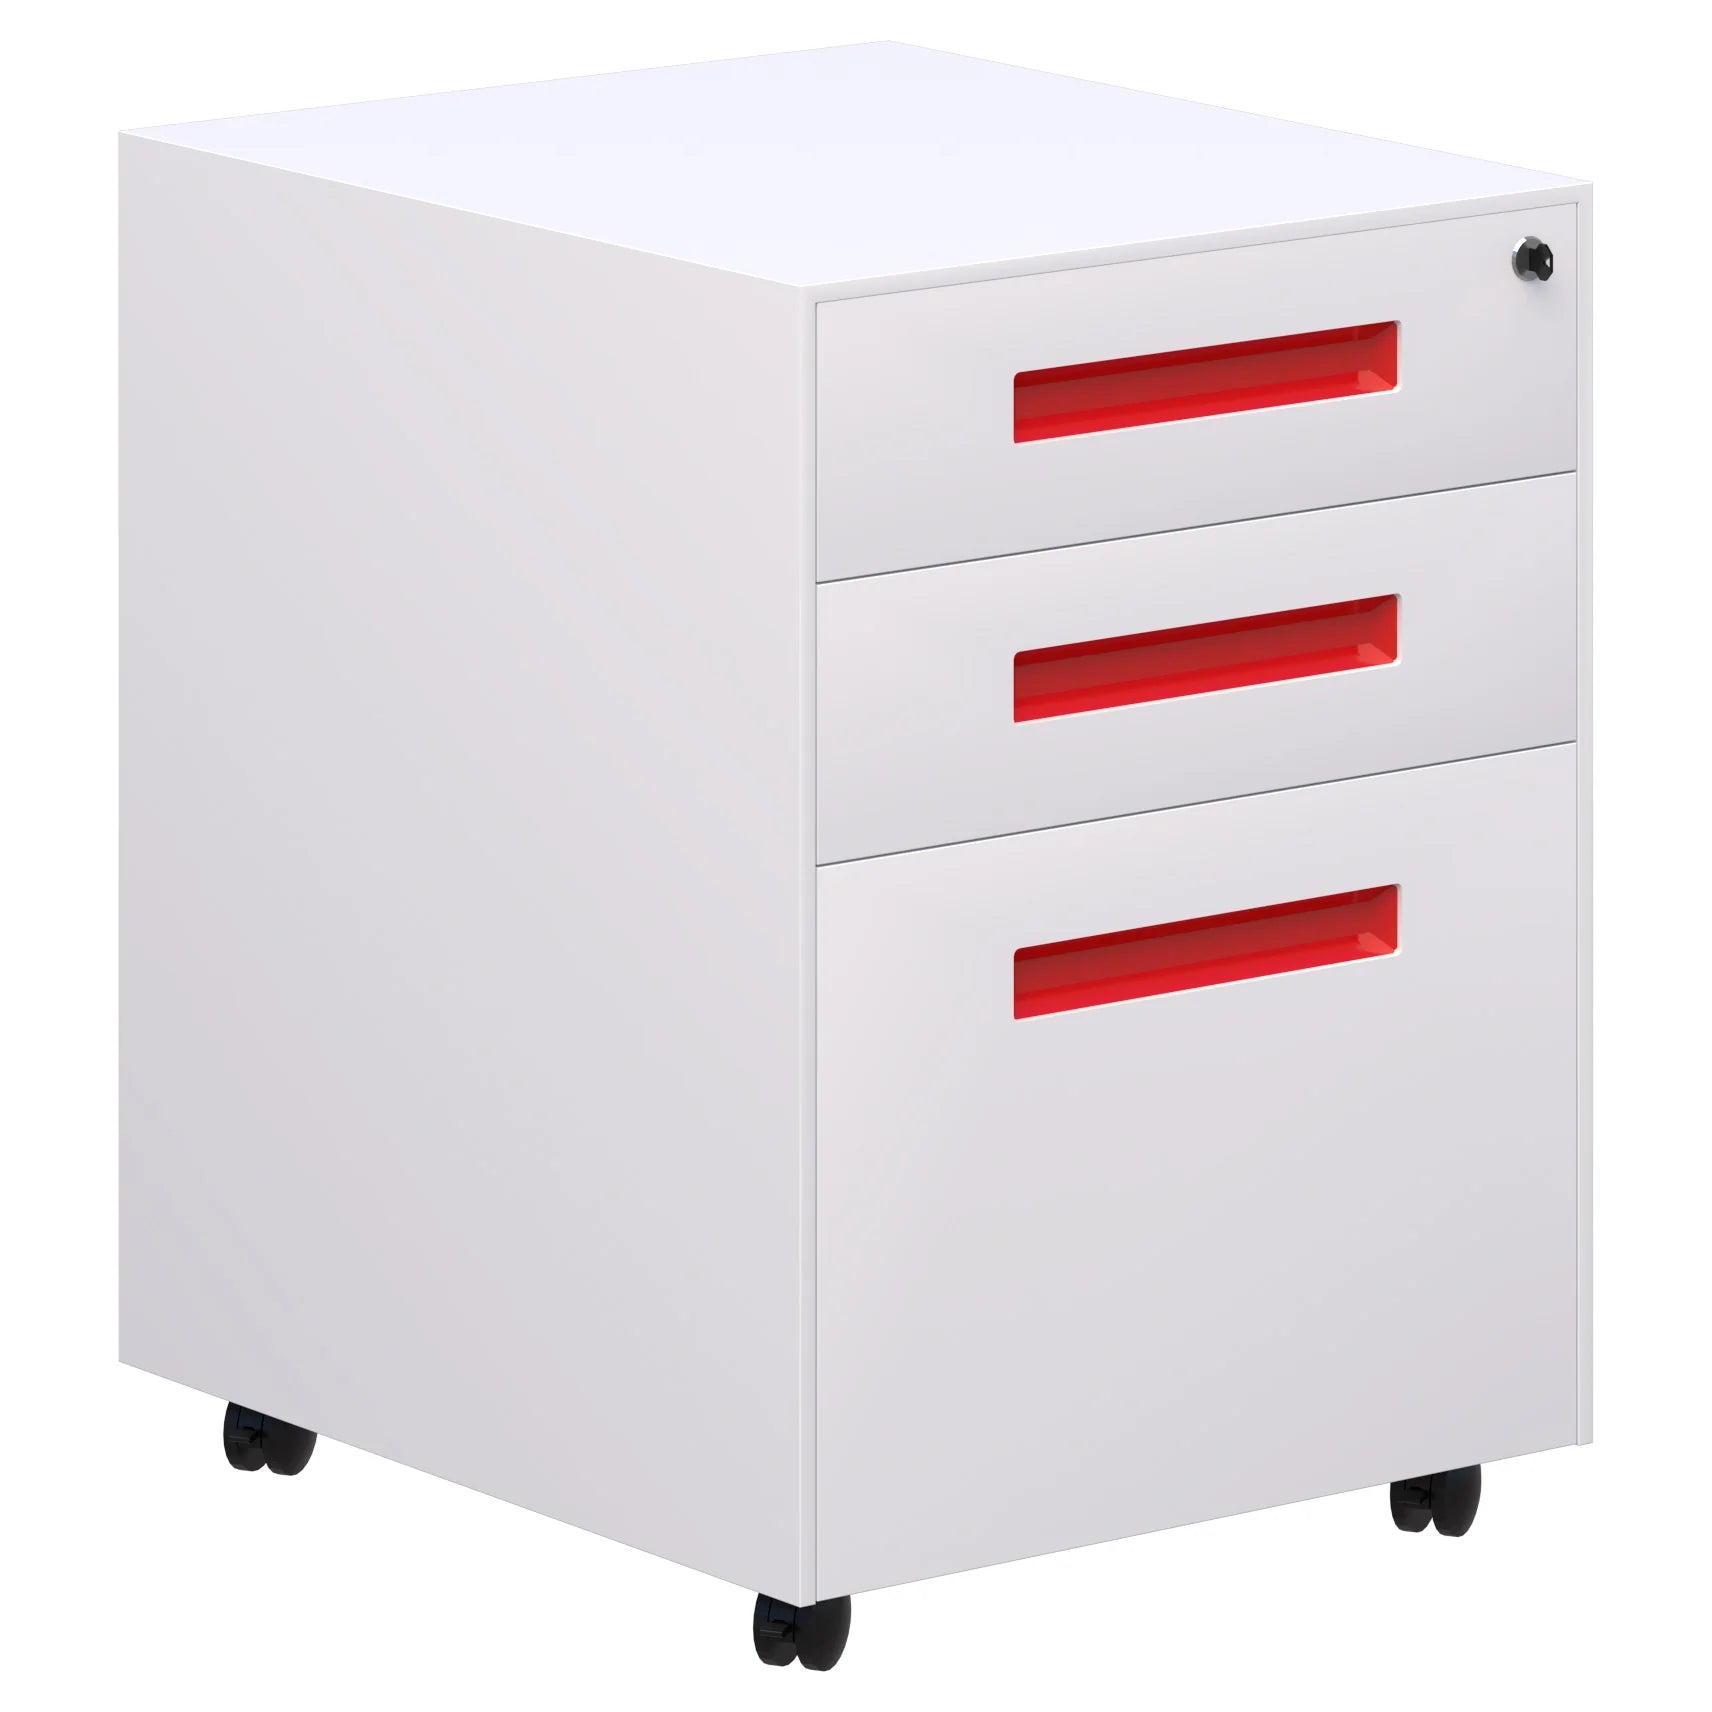 Lockable Spectrum metal mobile with two stationery drawers and 1 file draw in white with red handles.